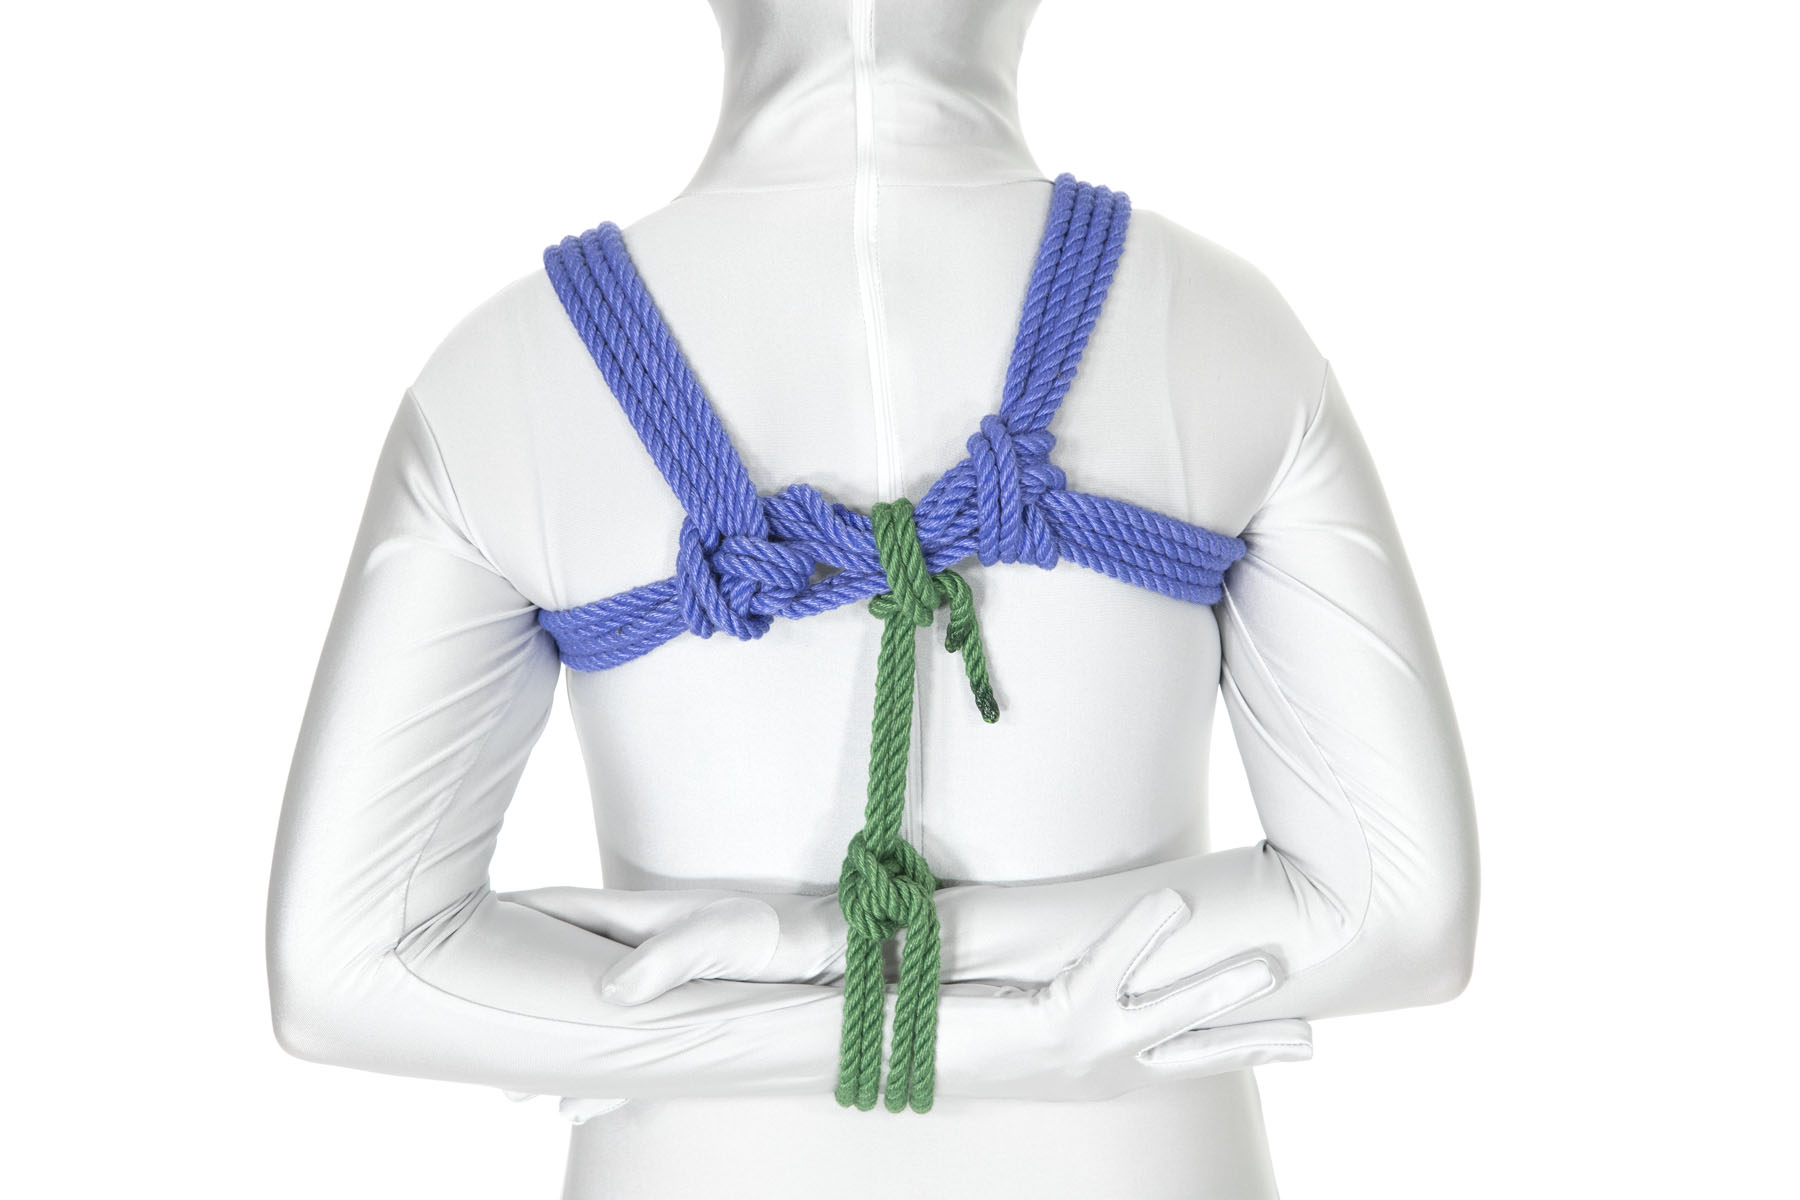 A rear view of a person in a white bodysuit wearing a blue chest harness. Their forearms are horizontal behind their back in an antiparallel position. The arms are bound together with a column tie in green rope and the tail of the green rope is tied off to the chest harness.